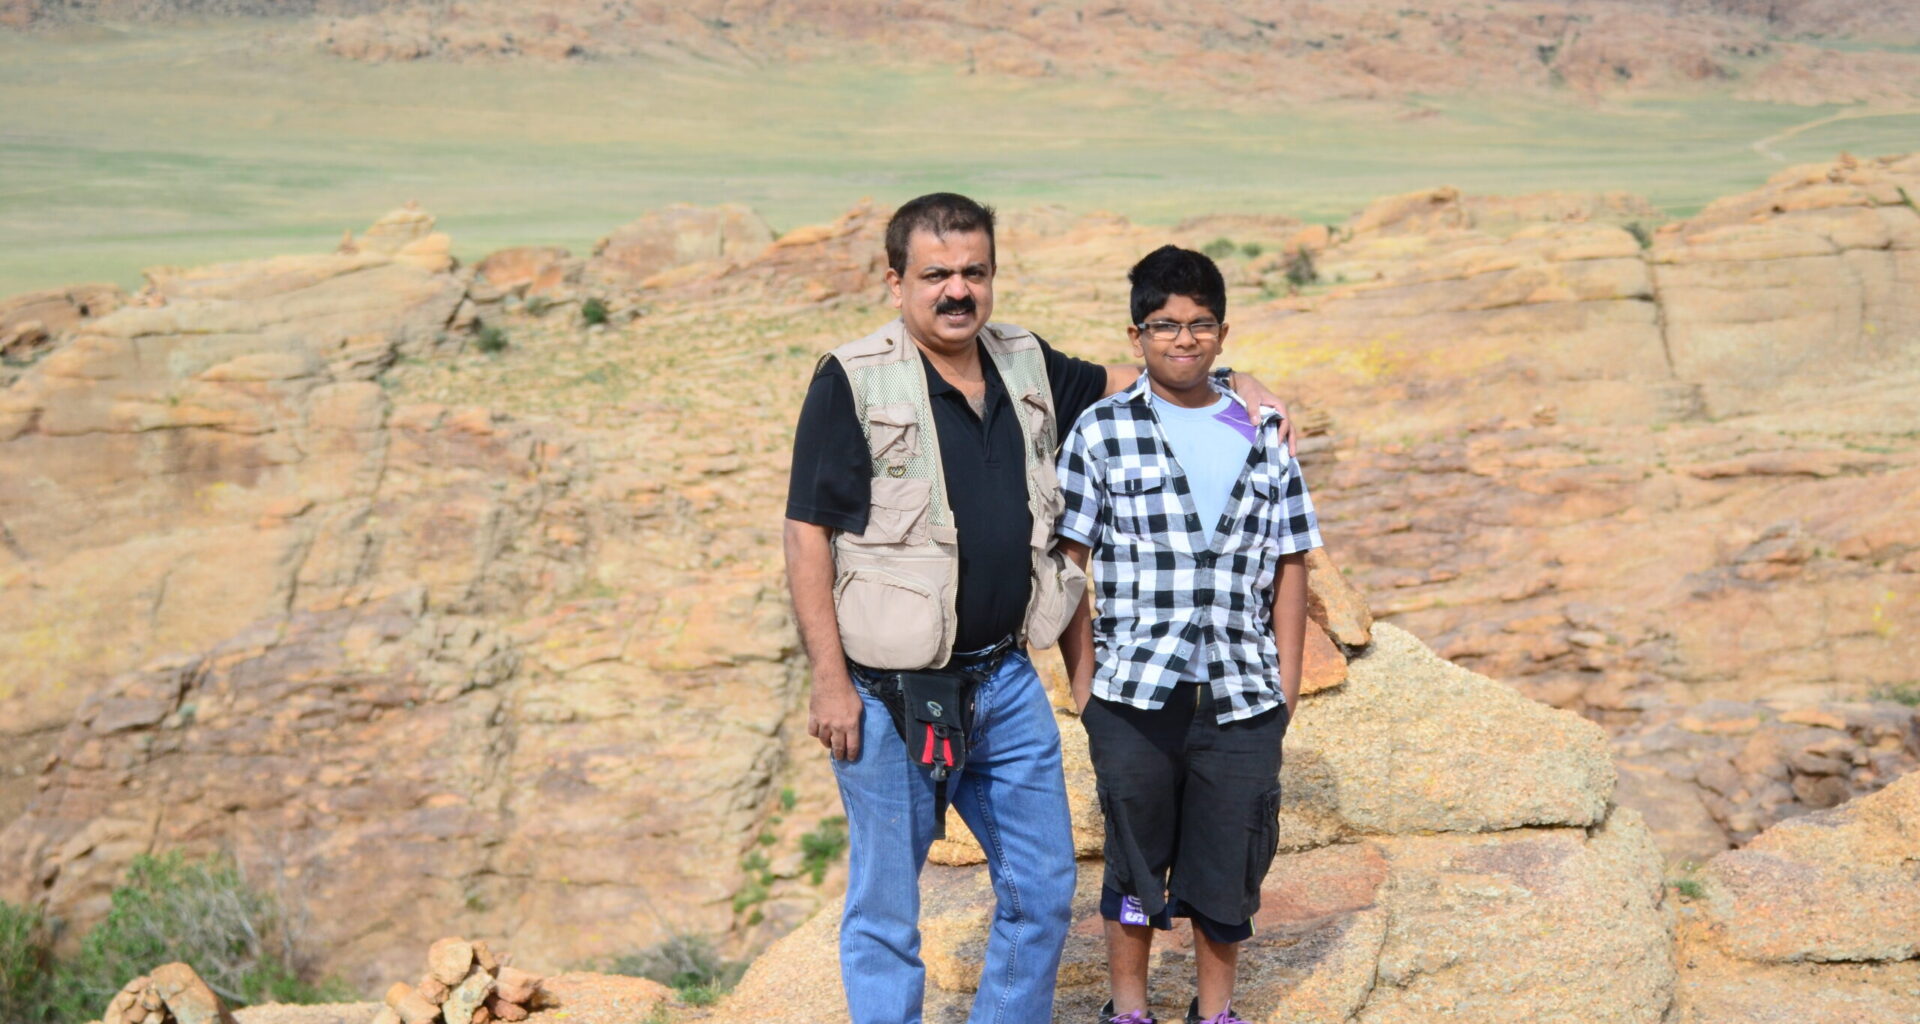 A father and son from India traveled to Mongolia for 20 days